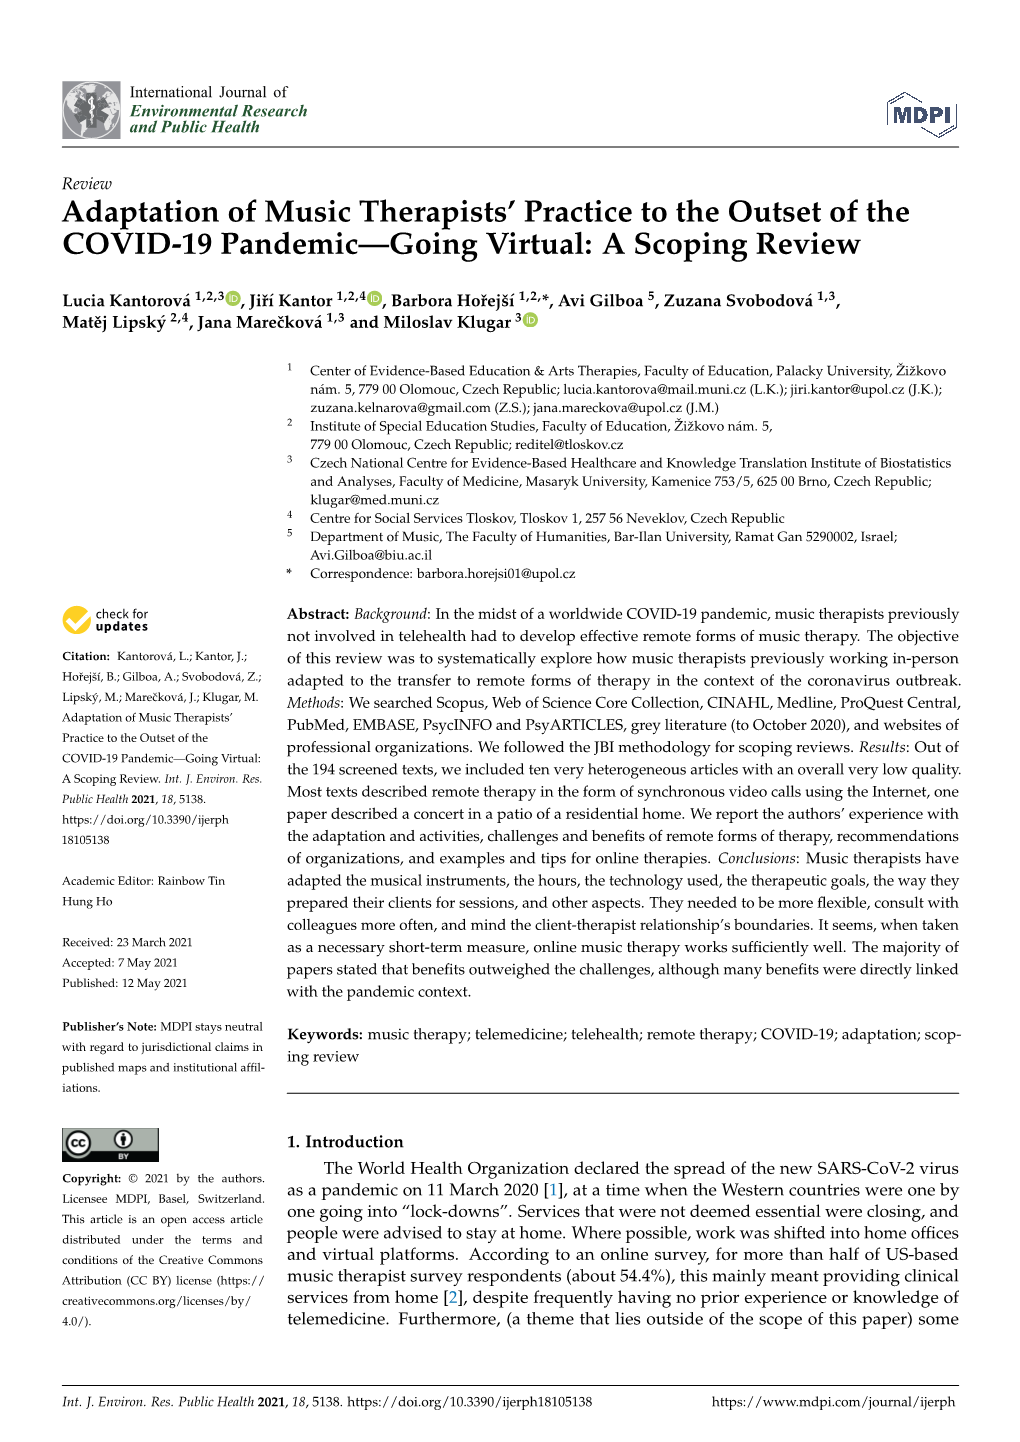 Adaptation of Music Therapists' Practice to the Outset of the COVID